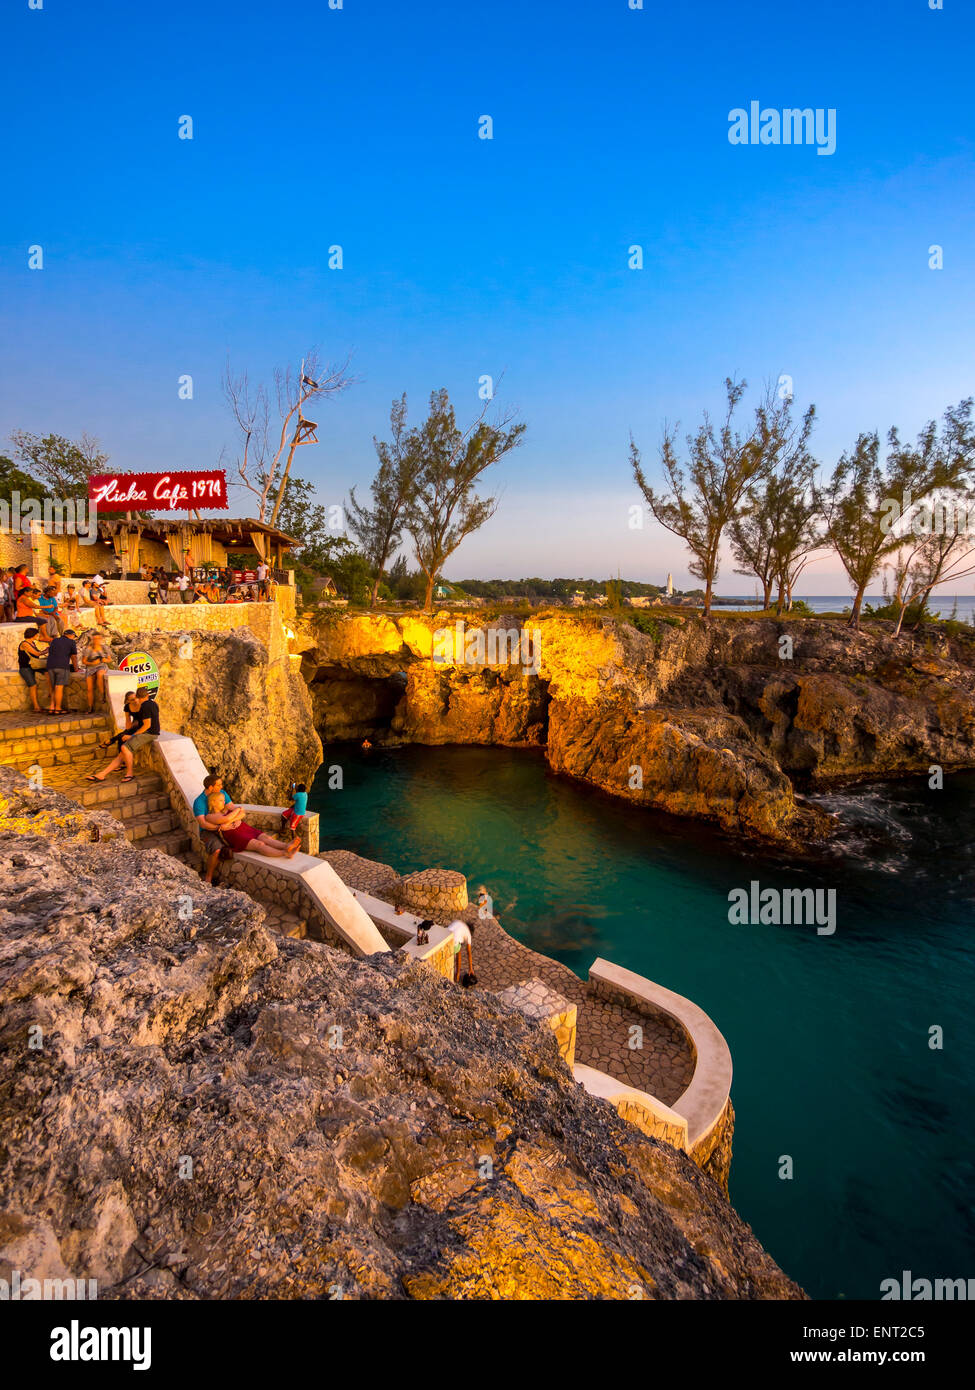 Rick's Cafe, well-known location on the beach in Negril, Region Westmoreland, Jamaica Stock Photo